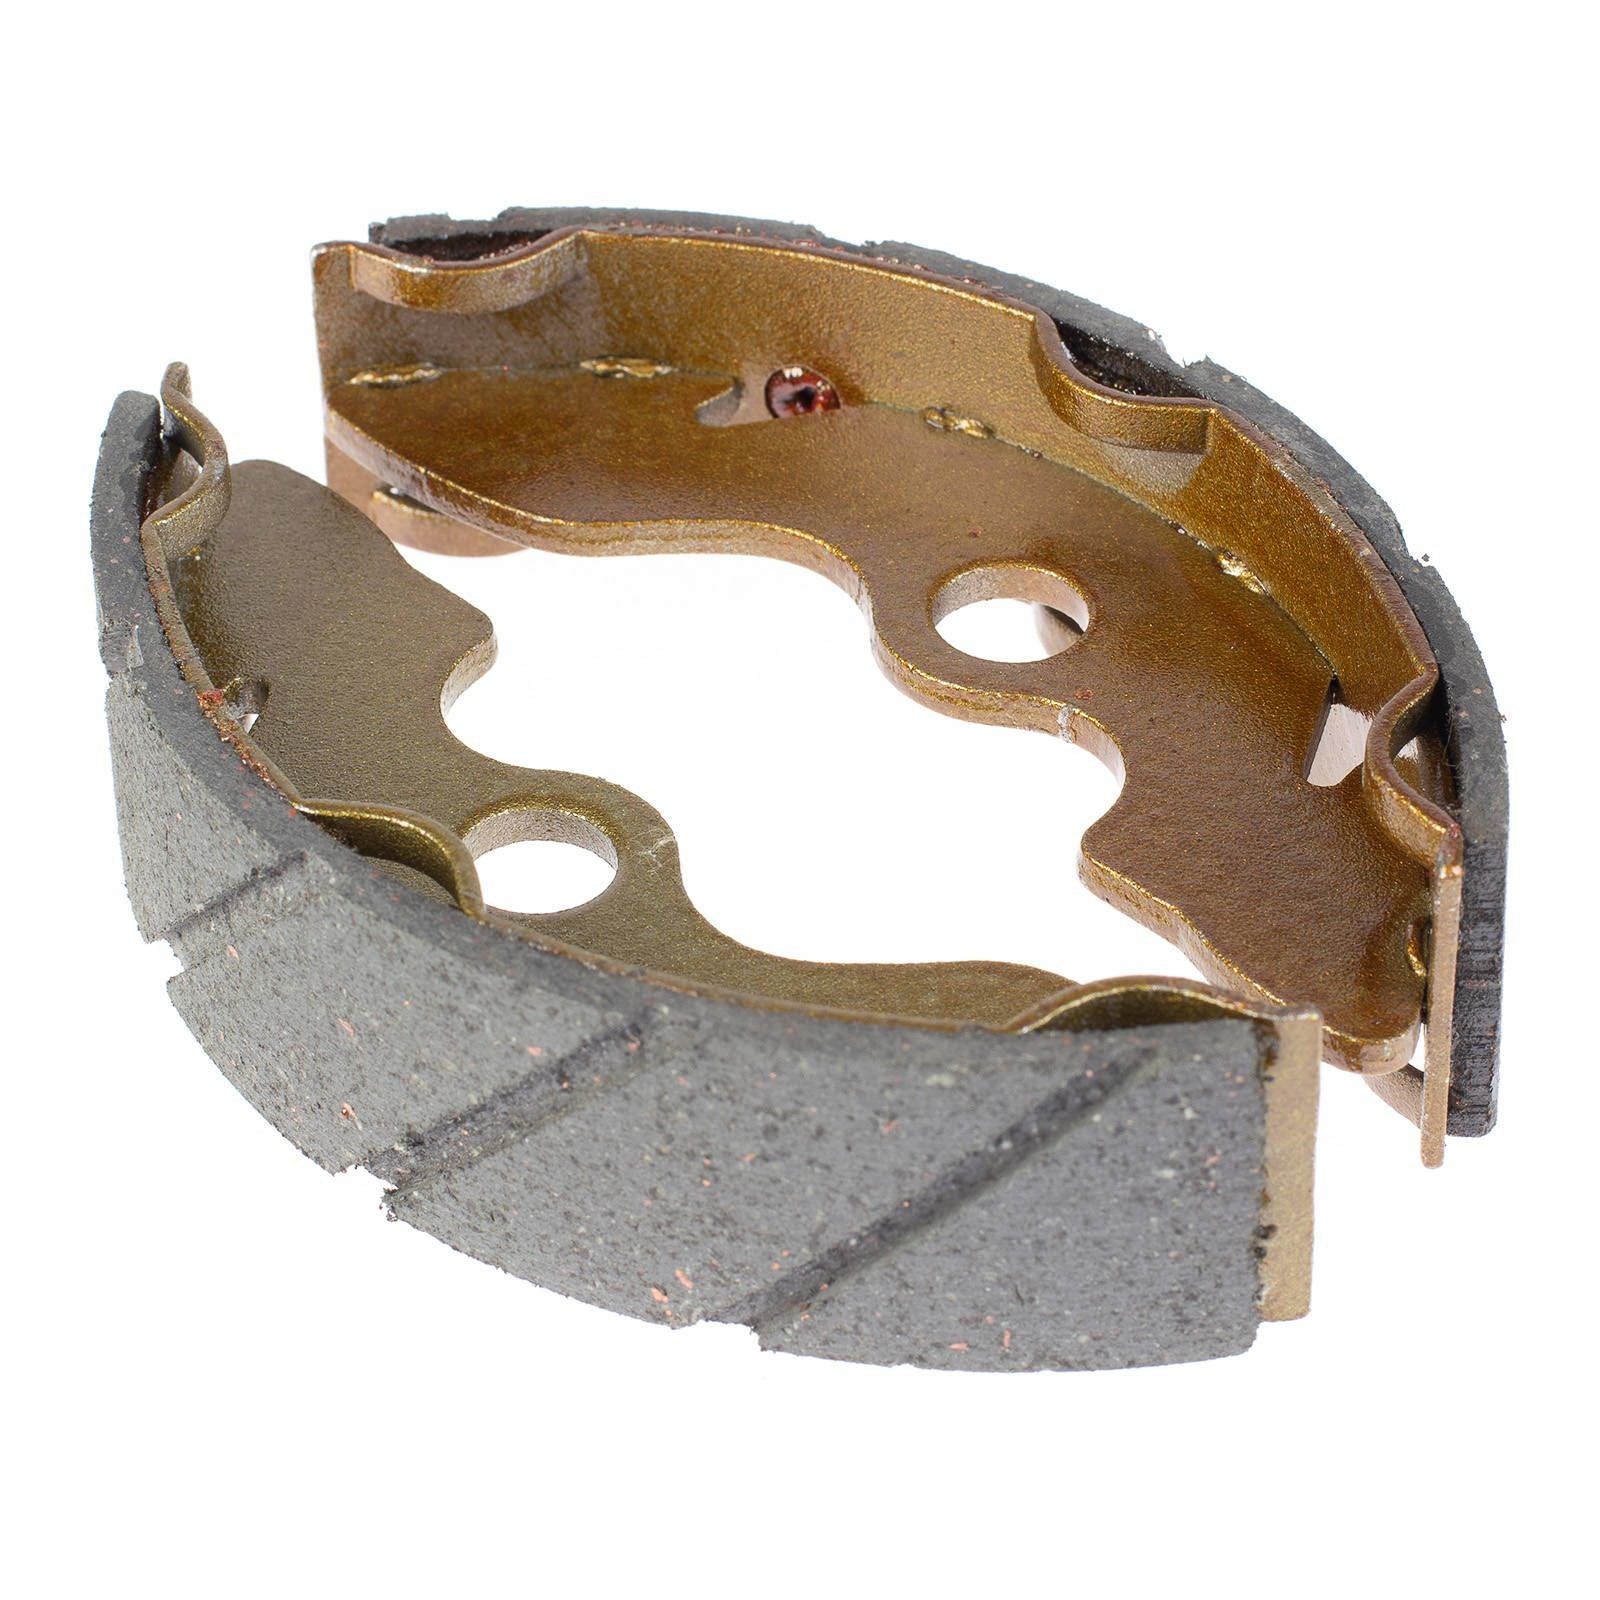 New WHITES Motorcycle Brake Shoes - Water Groove #WPBS39176